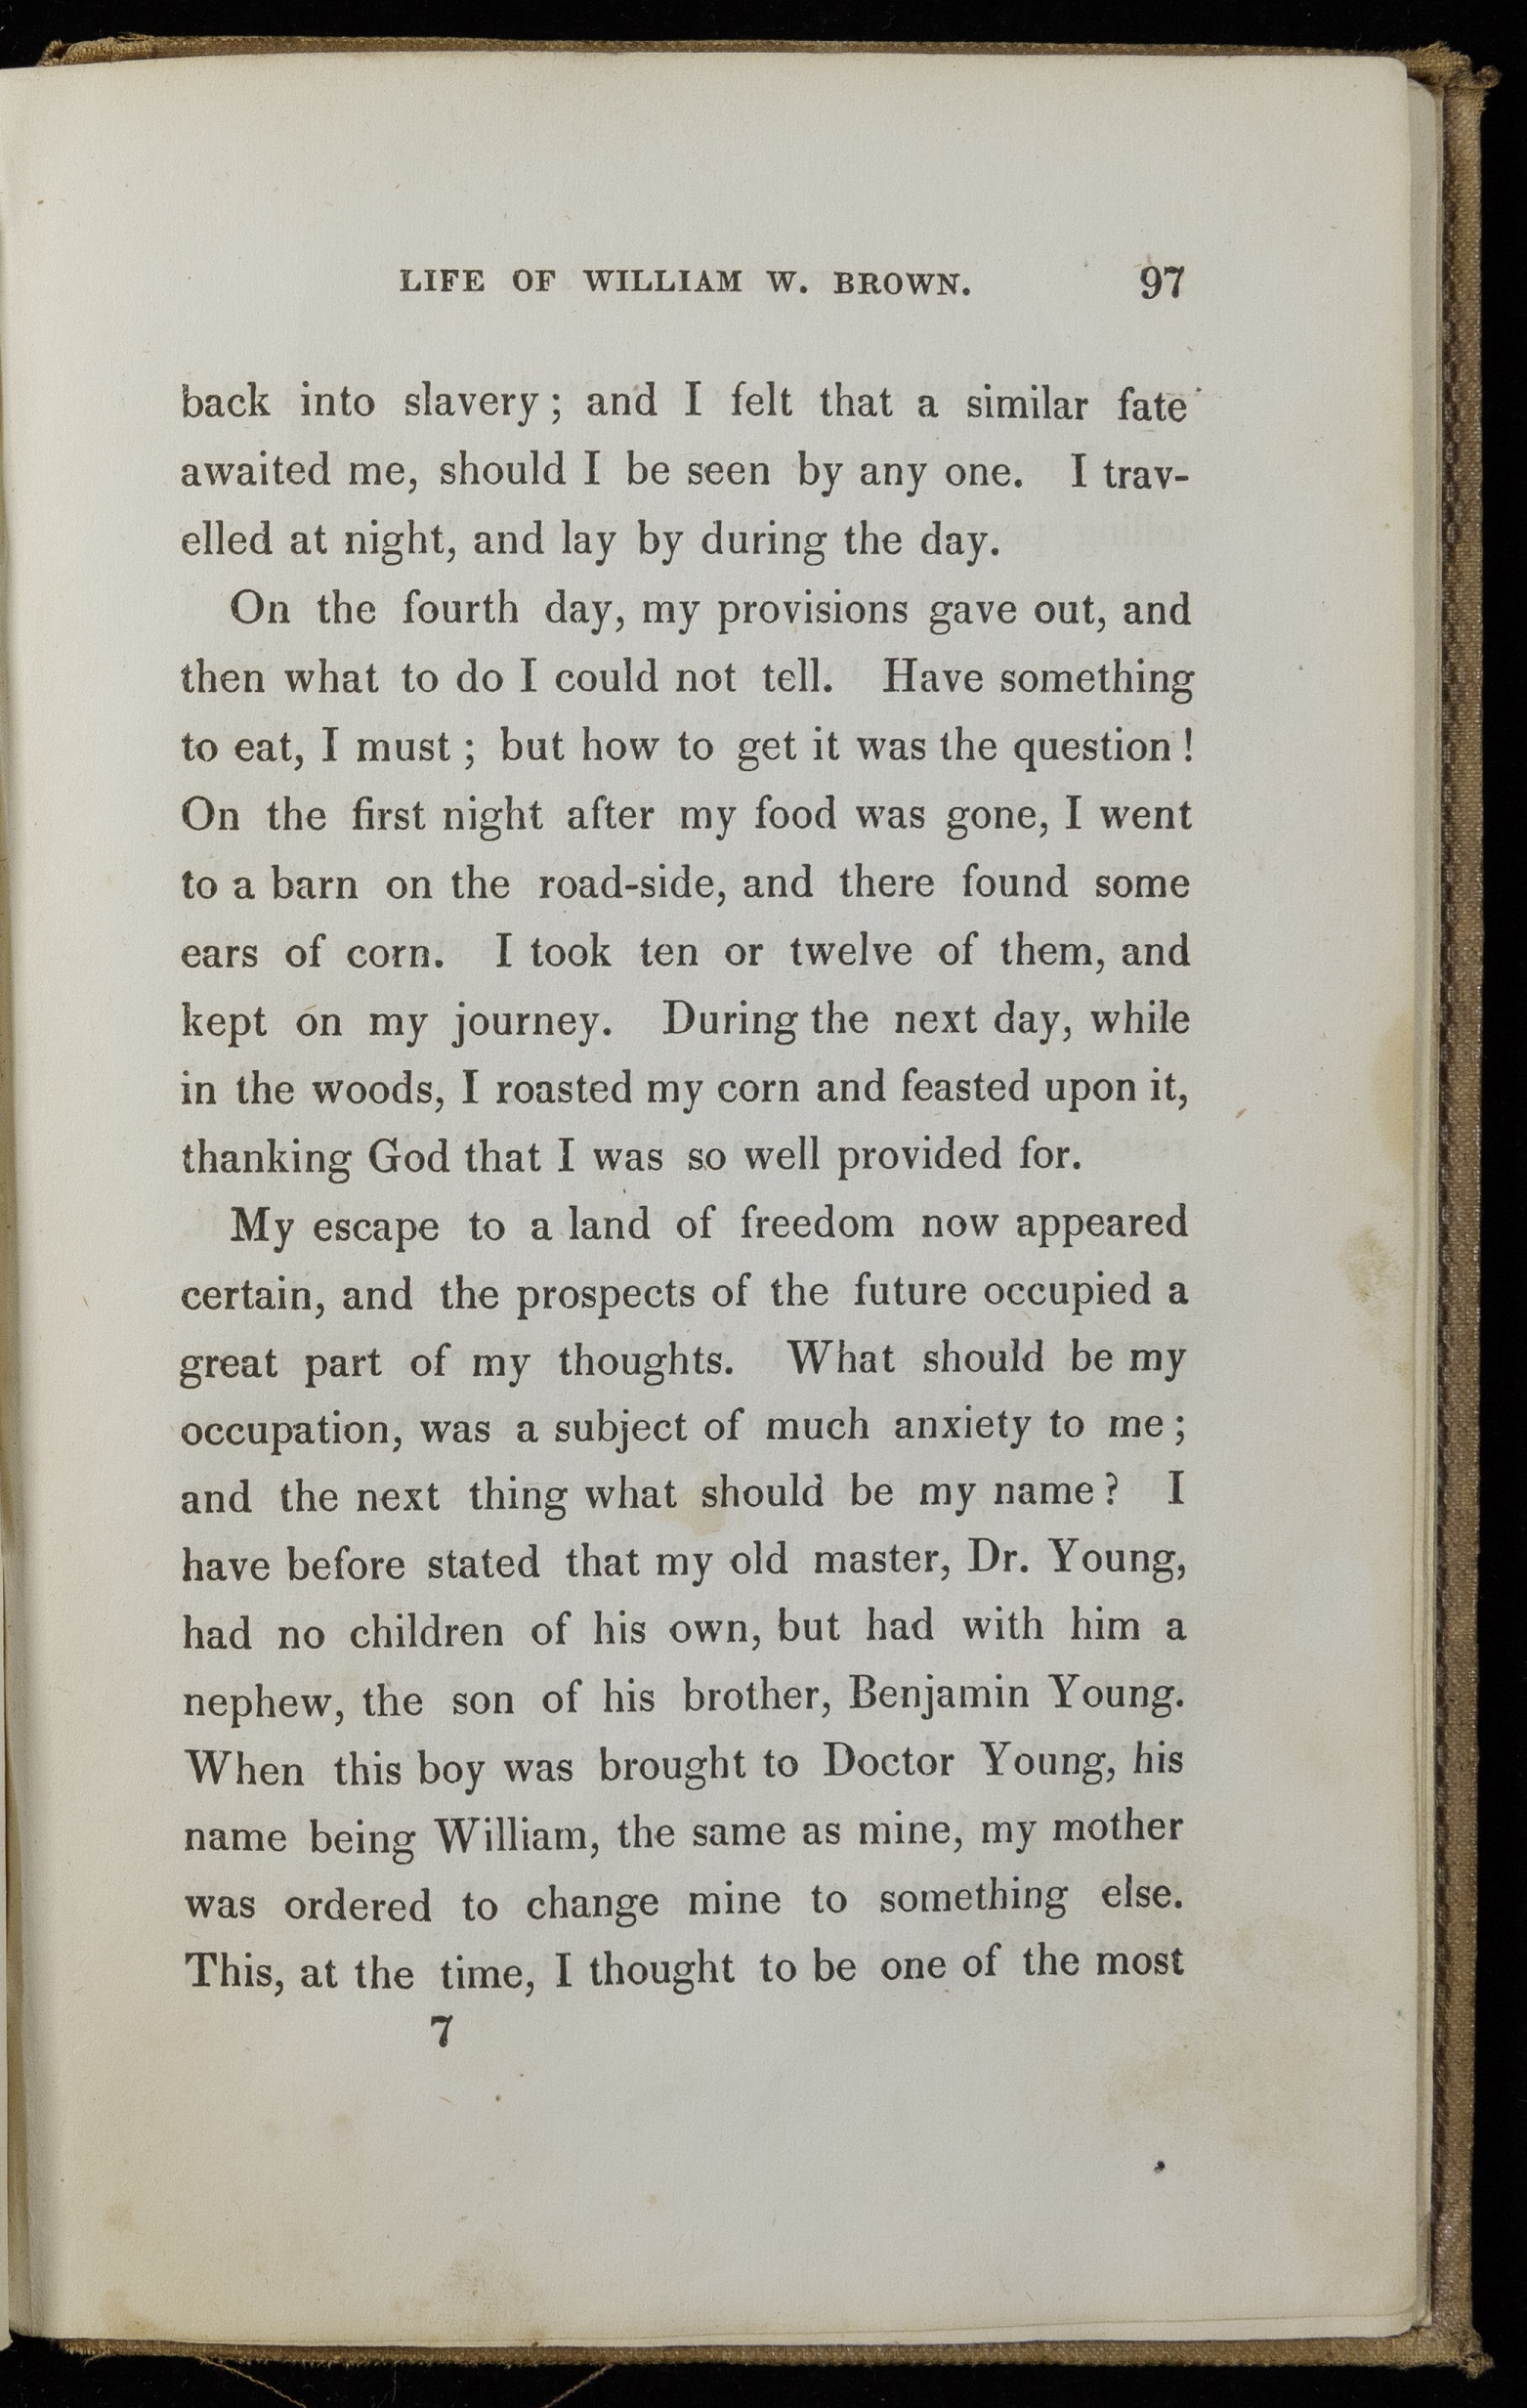 Single page of printed text. Text reads, "back into slavery; and I felt that a similar fate awaited me, should I be seen by any one. I travelled at night, and lay by during the day. On the fourth day, my provisions gave out, and then what to do I could not tell. Have something to eat, I must; but how to get it was the question! On the first night after my food was gone, I went to a barn on the road-side, and there found some ears of corn. I took ten or twelve of them, and kept on my journey. During the next day, while in the woods, I roasted my corn and feasted upon it, thanking God that I was so well provided for. My escape to a land of freedom now appeared certain, and the prospects of the future occupied a great part of my thoughts. What should be my occupation, was a subject of much anxiety to me; and the next thing what should be my name? I have before stated that my old master, Dr. Young, had no children of his own, but had with him a nephew, the son of his brother, Benjamin Young. When this boy was brought to Doctor Young, his name being William, the same name as mine, my mother was ordered to change mine to something else."